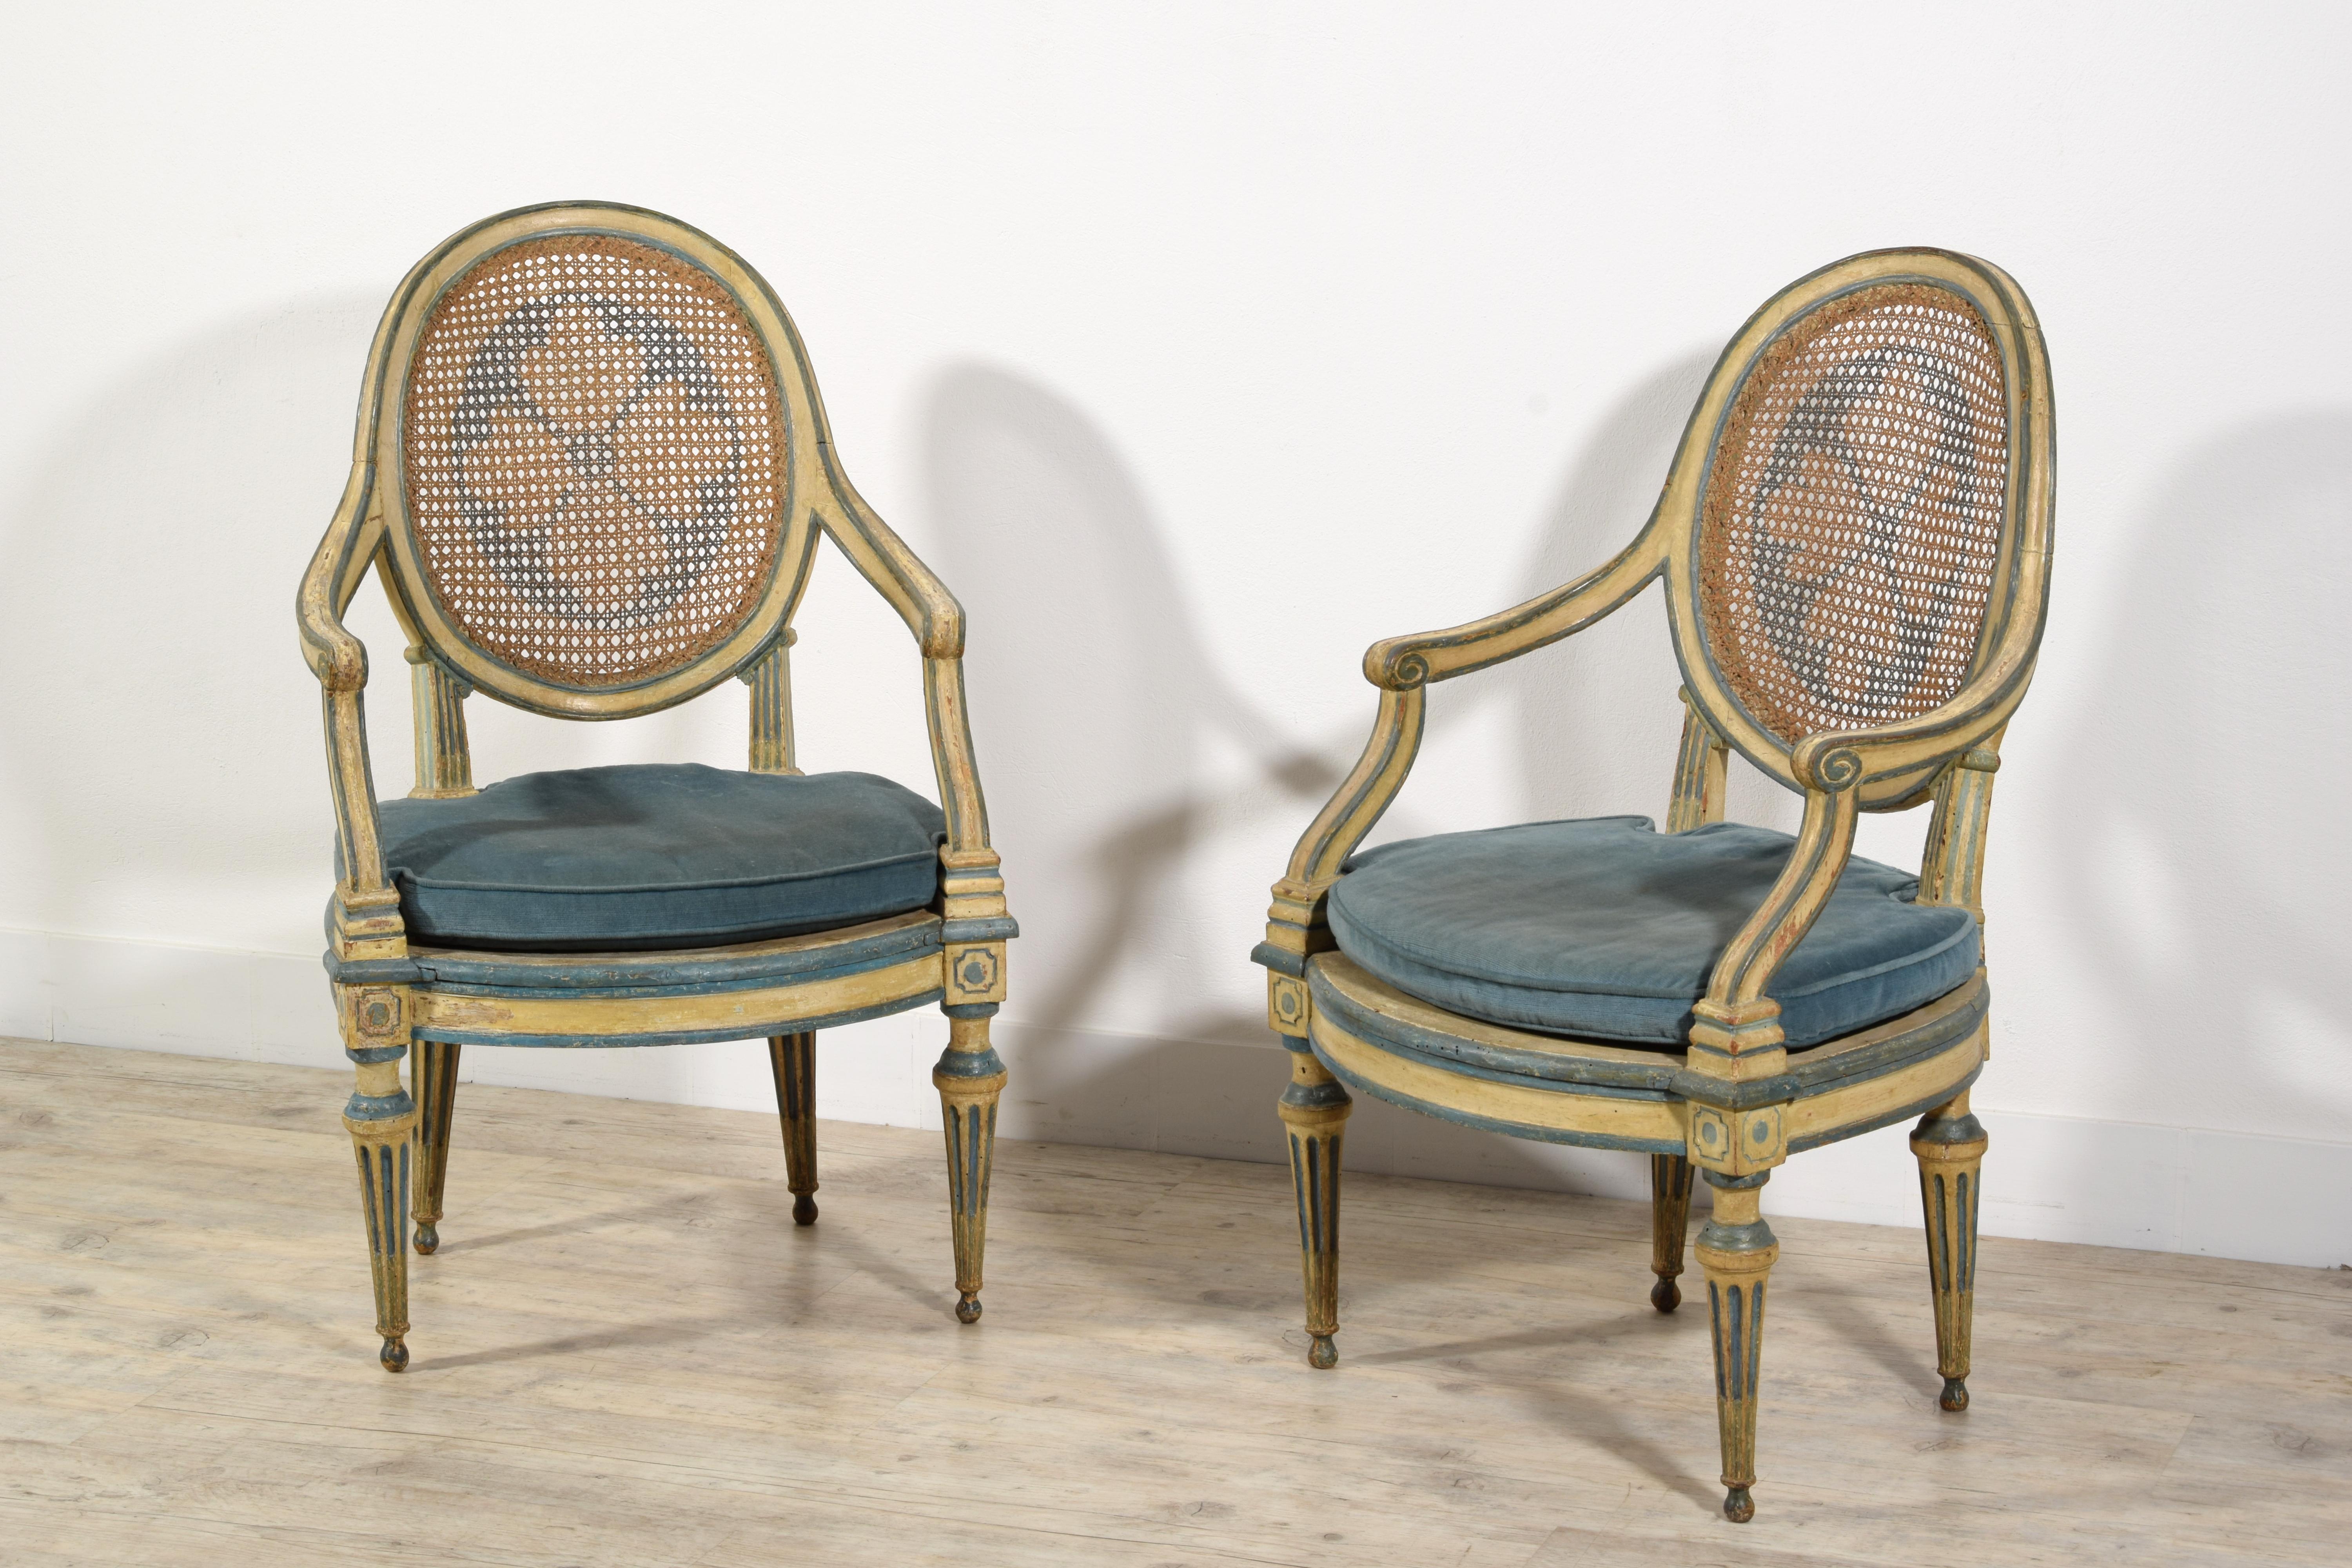 18th Century Pair of Italian Neoclassical Lacquered Wood Armchairs For Sale 11